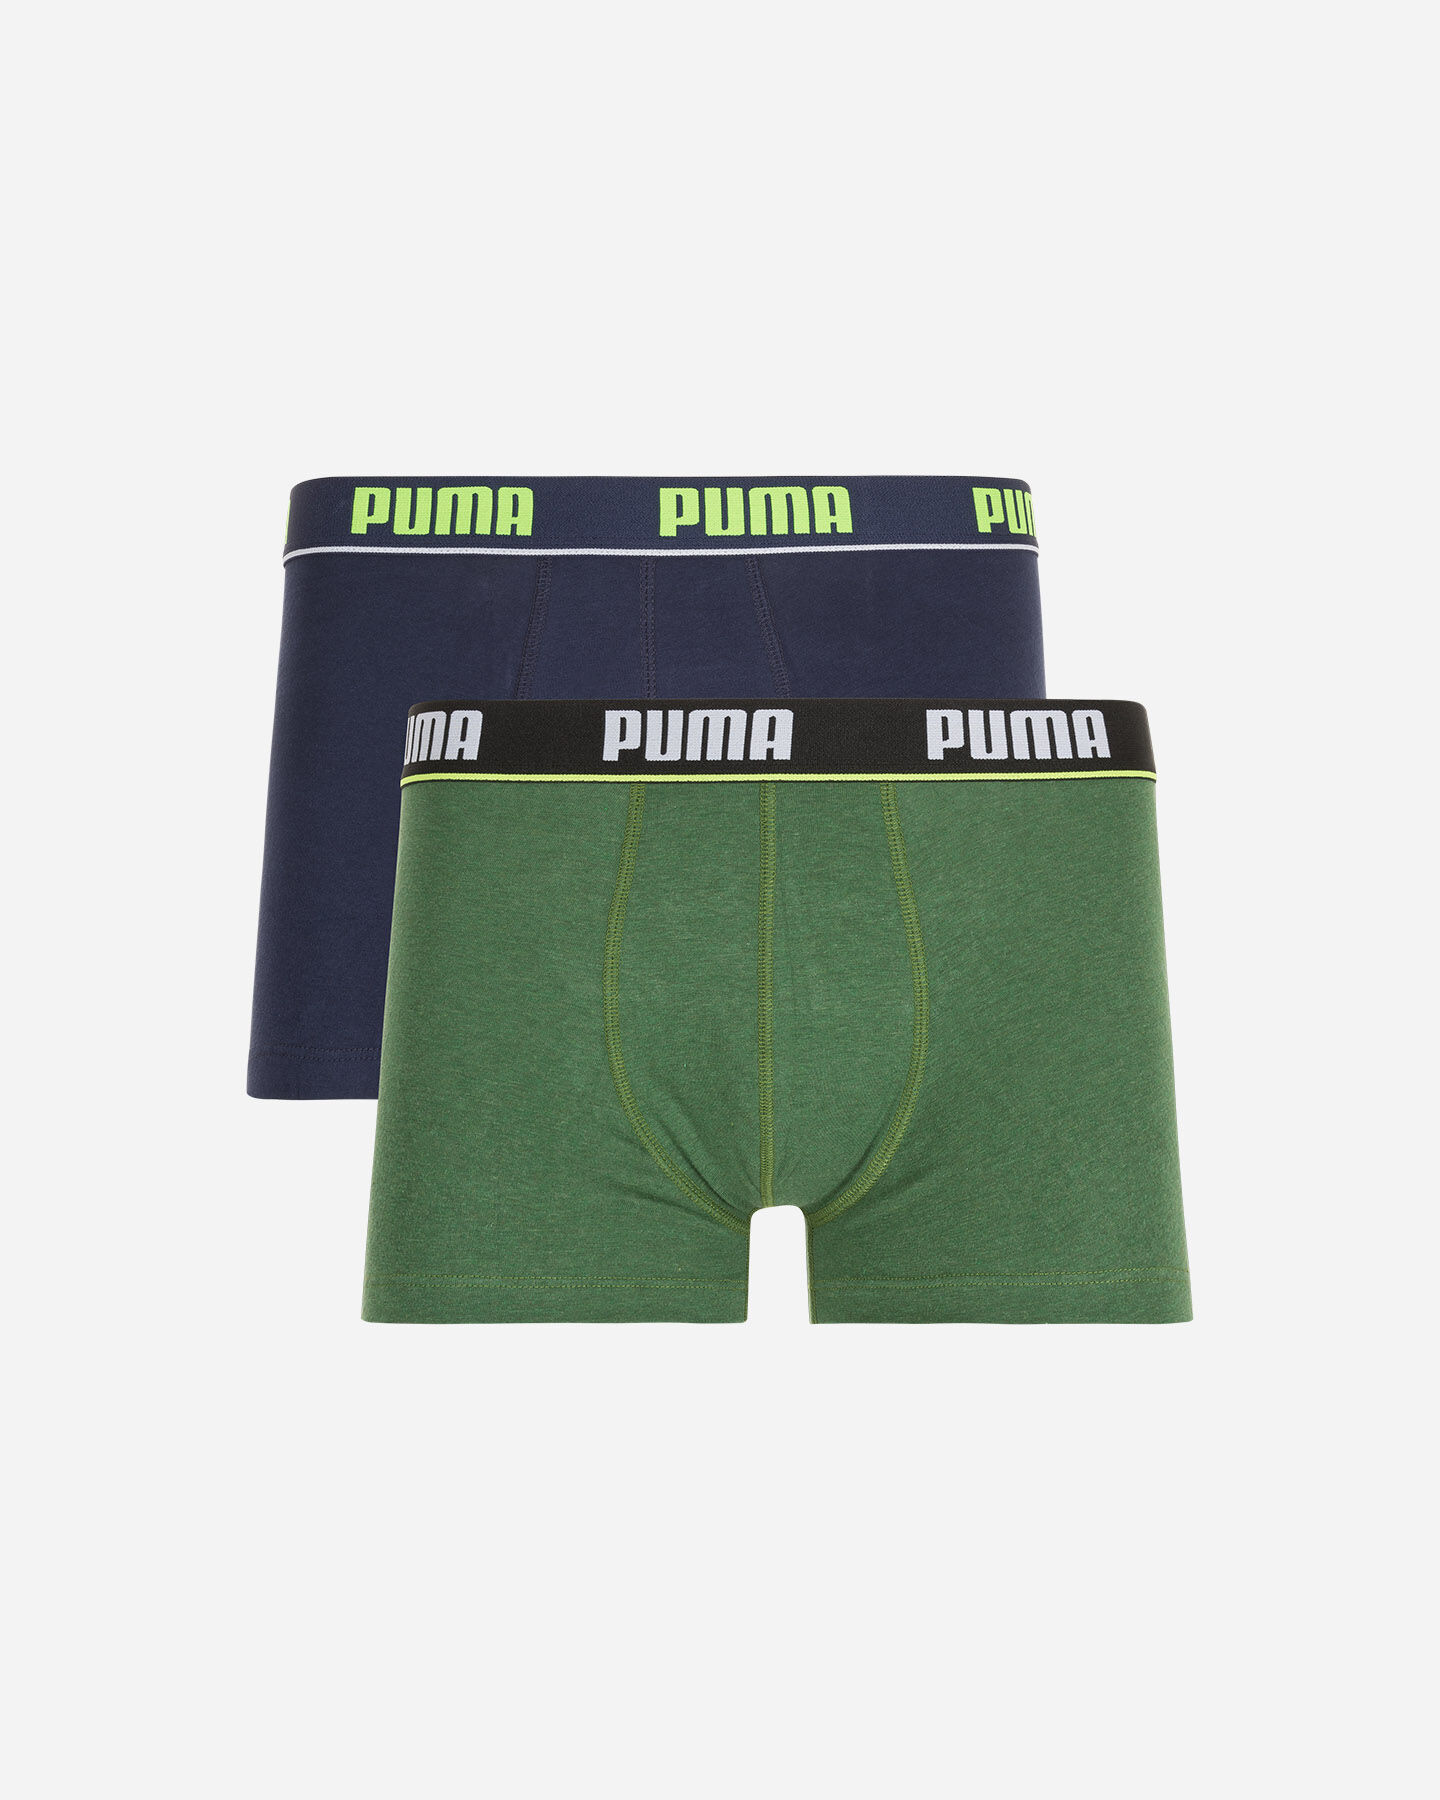  Intimo PUMA 2 PACK BOXER SHORT M S4076470|439|040 scatto 0